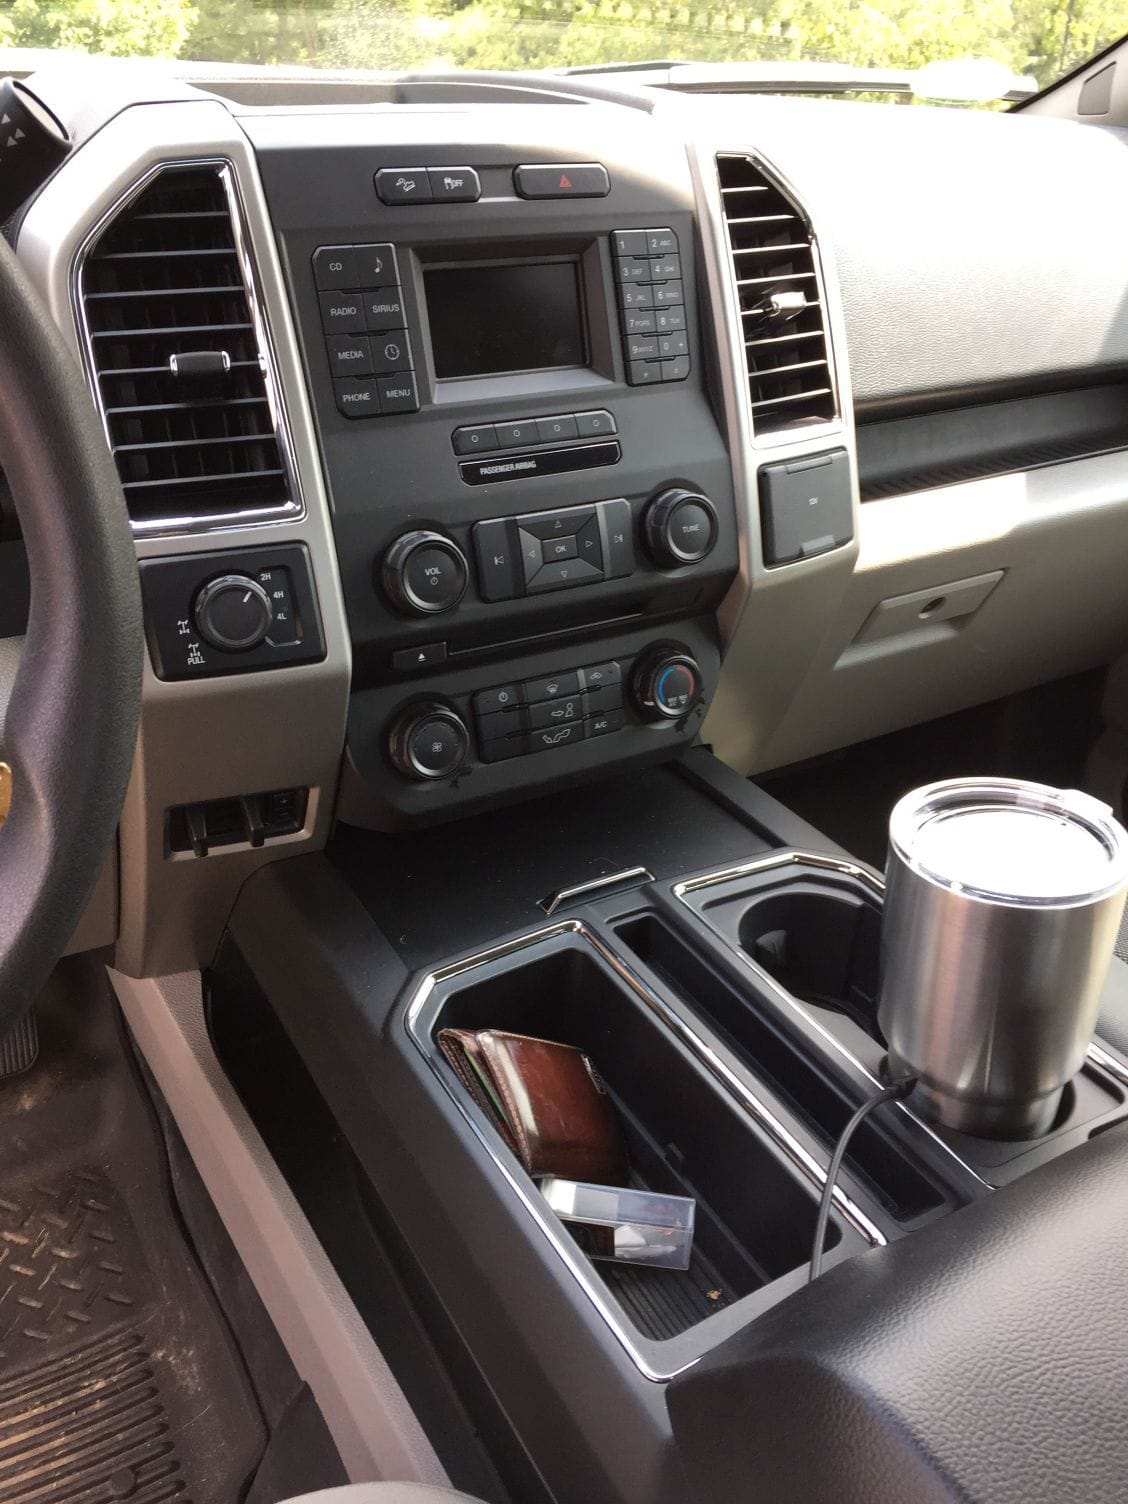 Center console from an f150? - Ford Truck Enthusiasts Forums